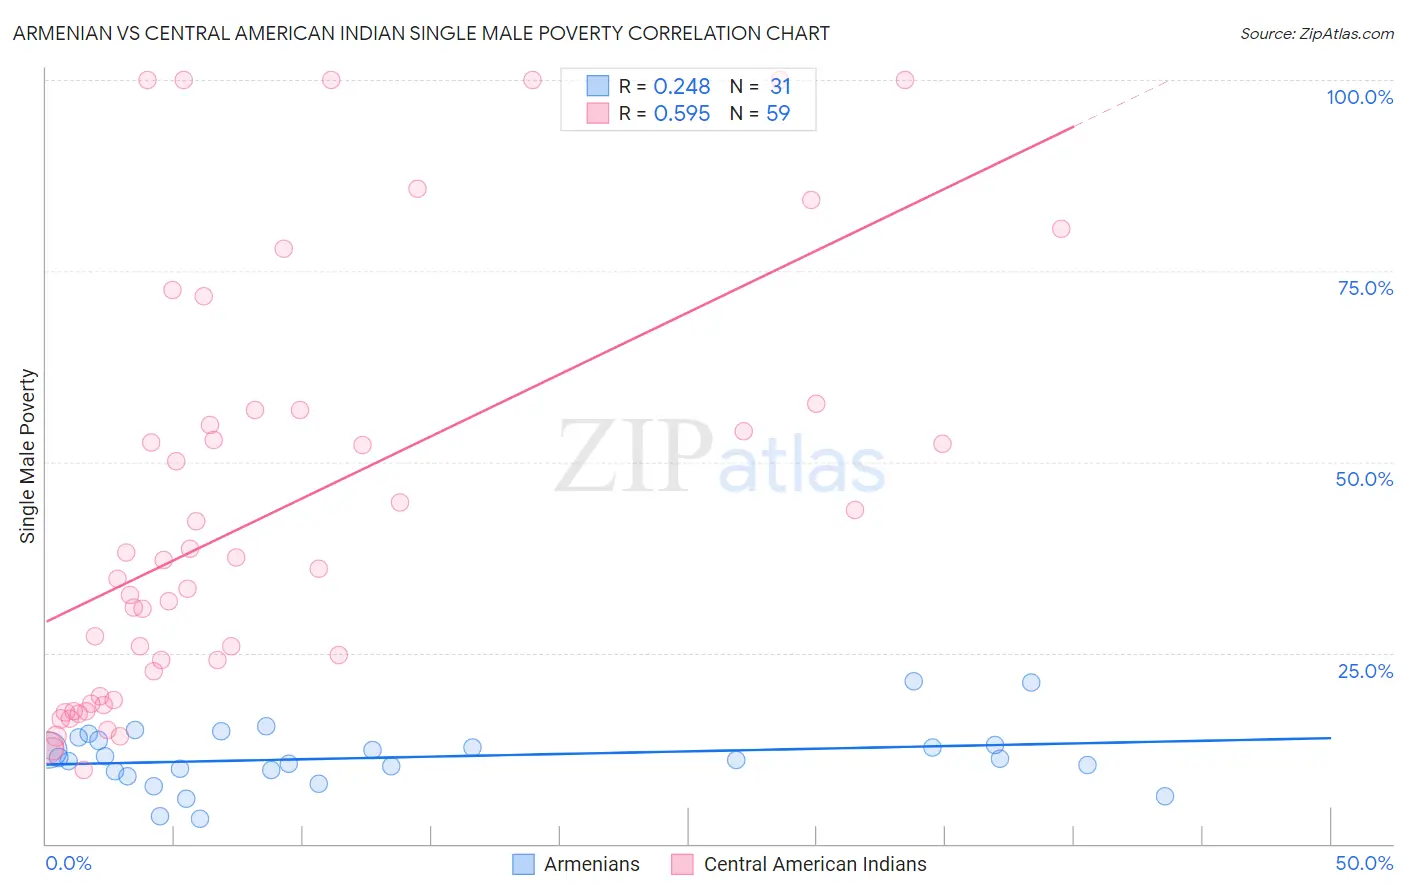 Armenian vs Central American Indian Single Male Poverty